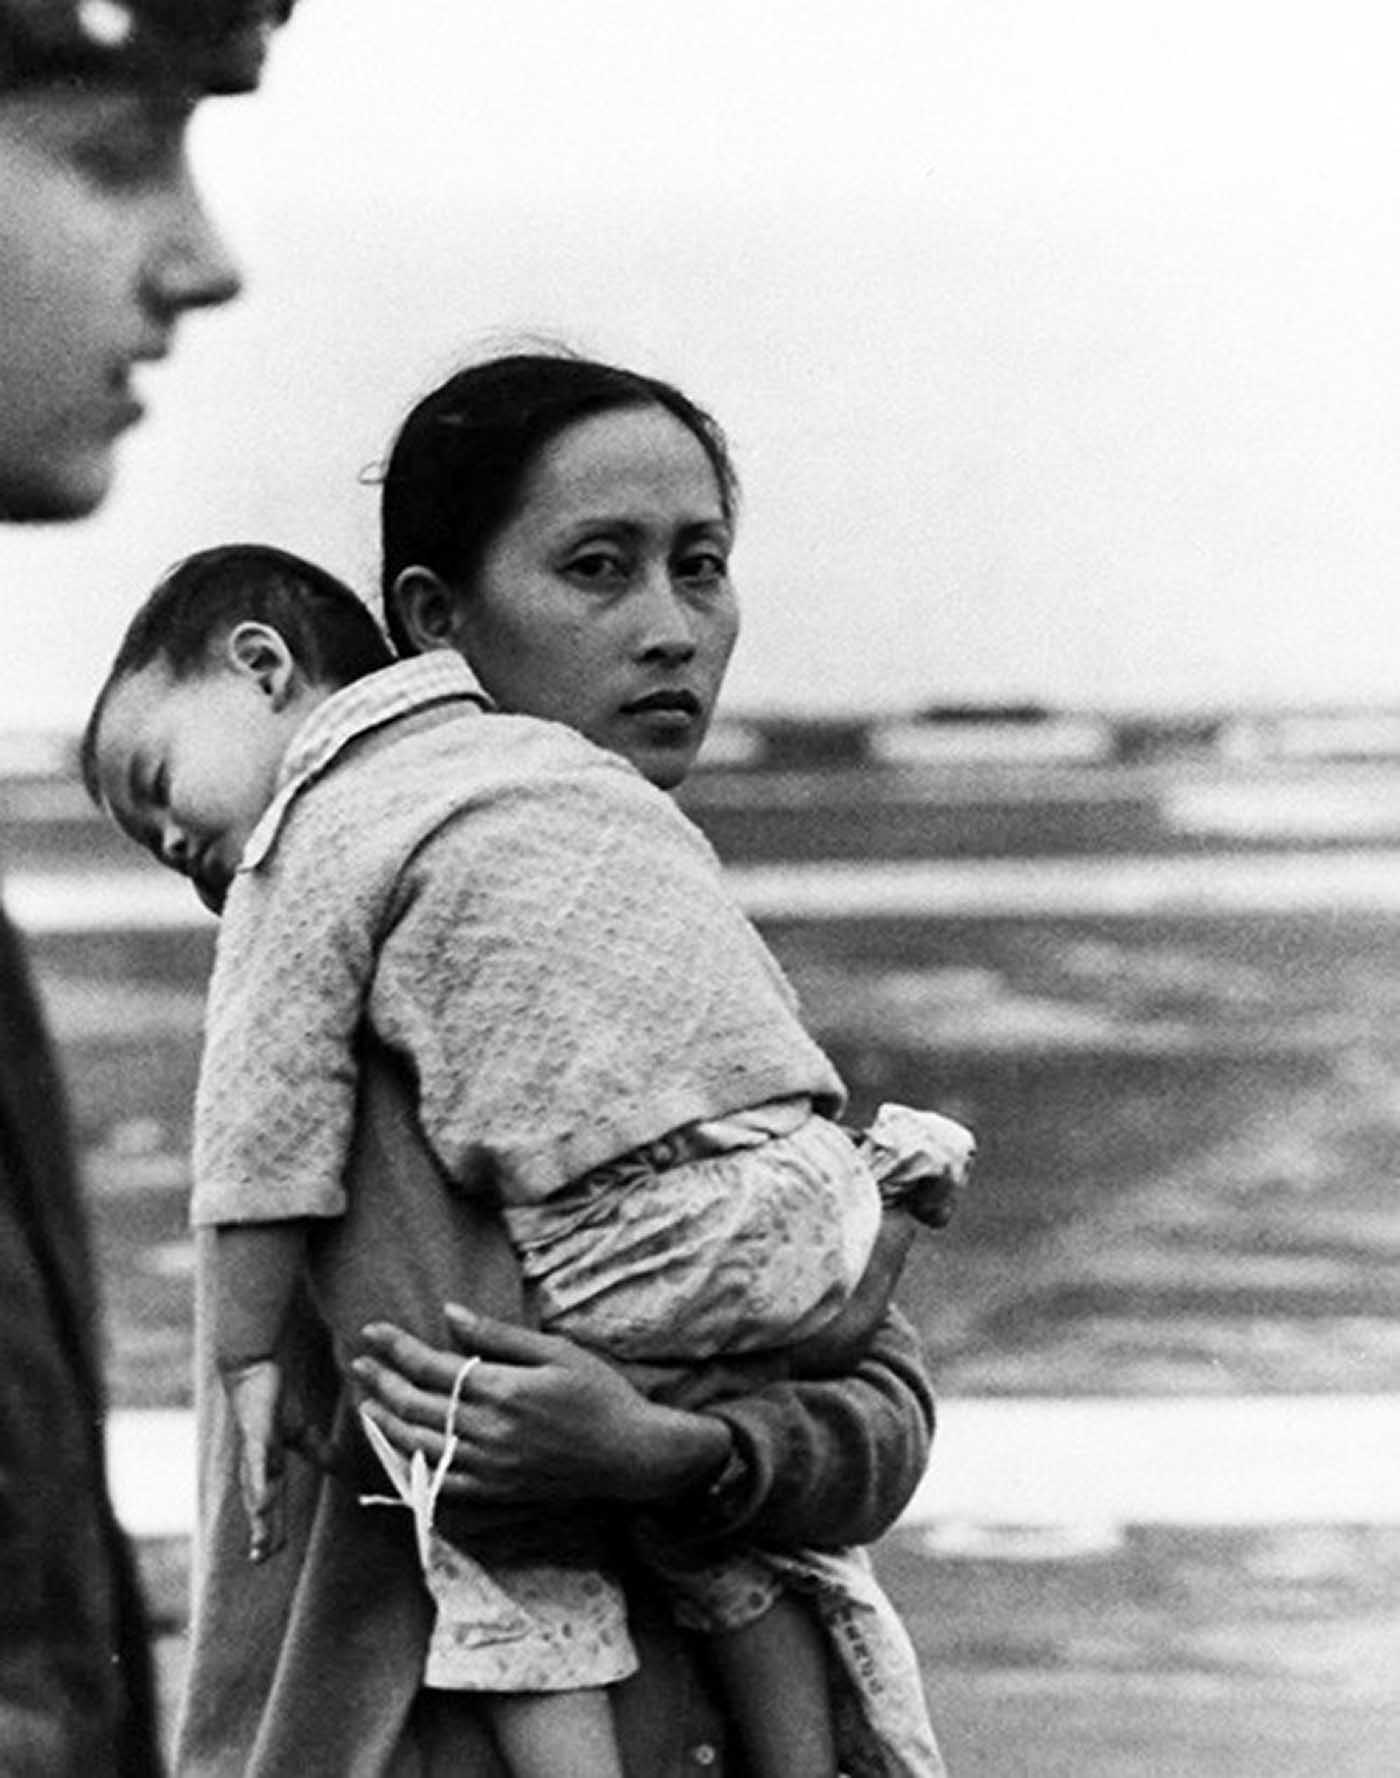 A Vietnamese woman, carrying her son, is given a numbered tag as she arrives onboard USS Hancock (CV-19).